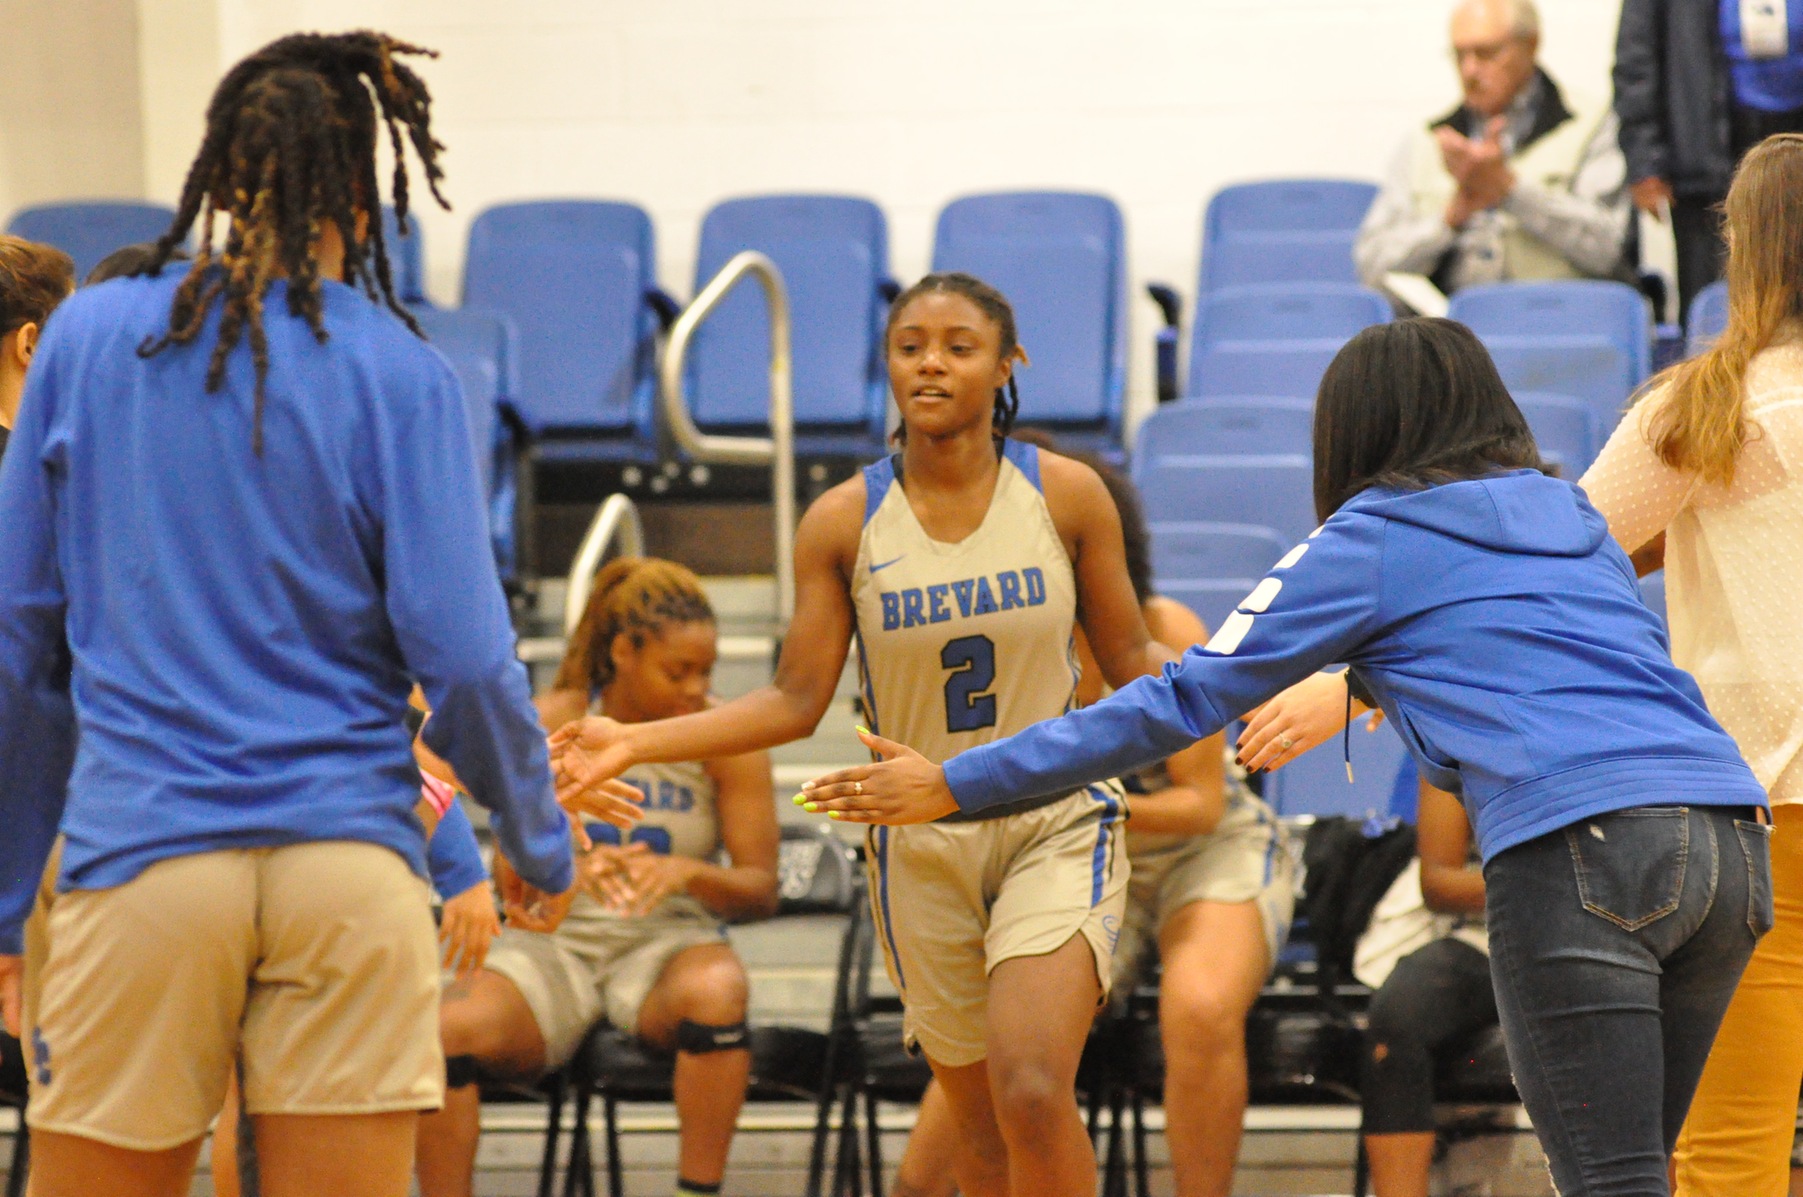 Brevard leading scorer Shakirah Thompson and the BC women's basketball team prepare to host Warren Wilson on Monday at 7 p.m. (Photo courtesy of Tommy Moss).